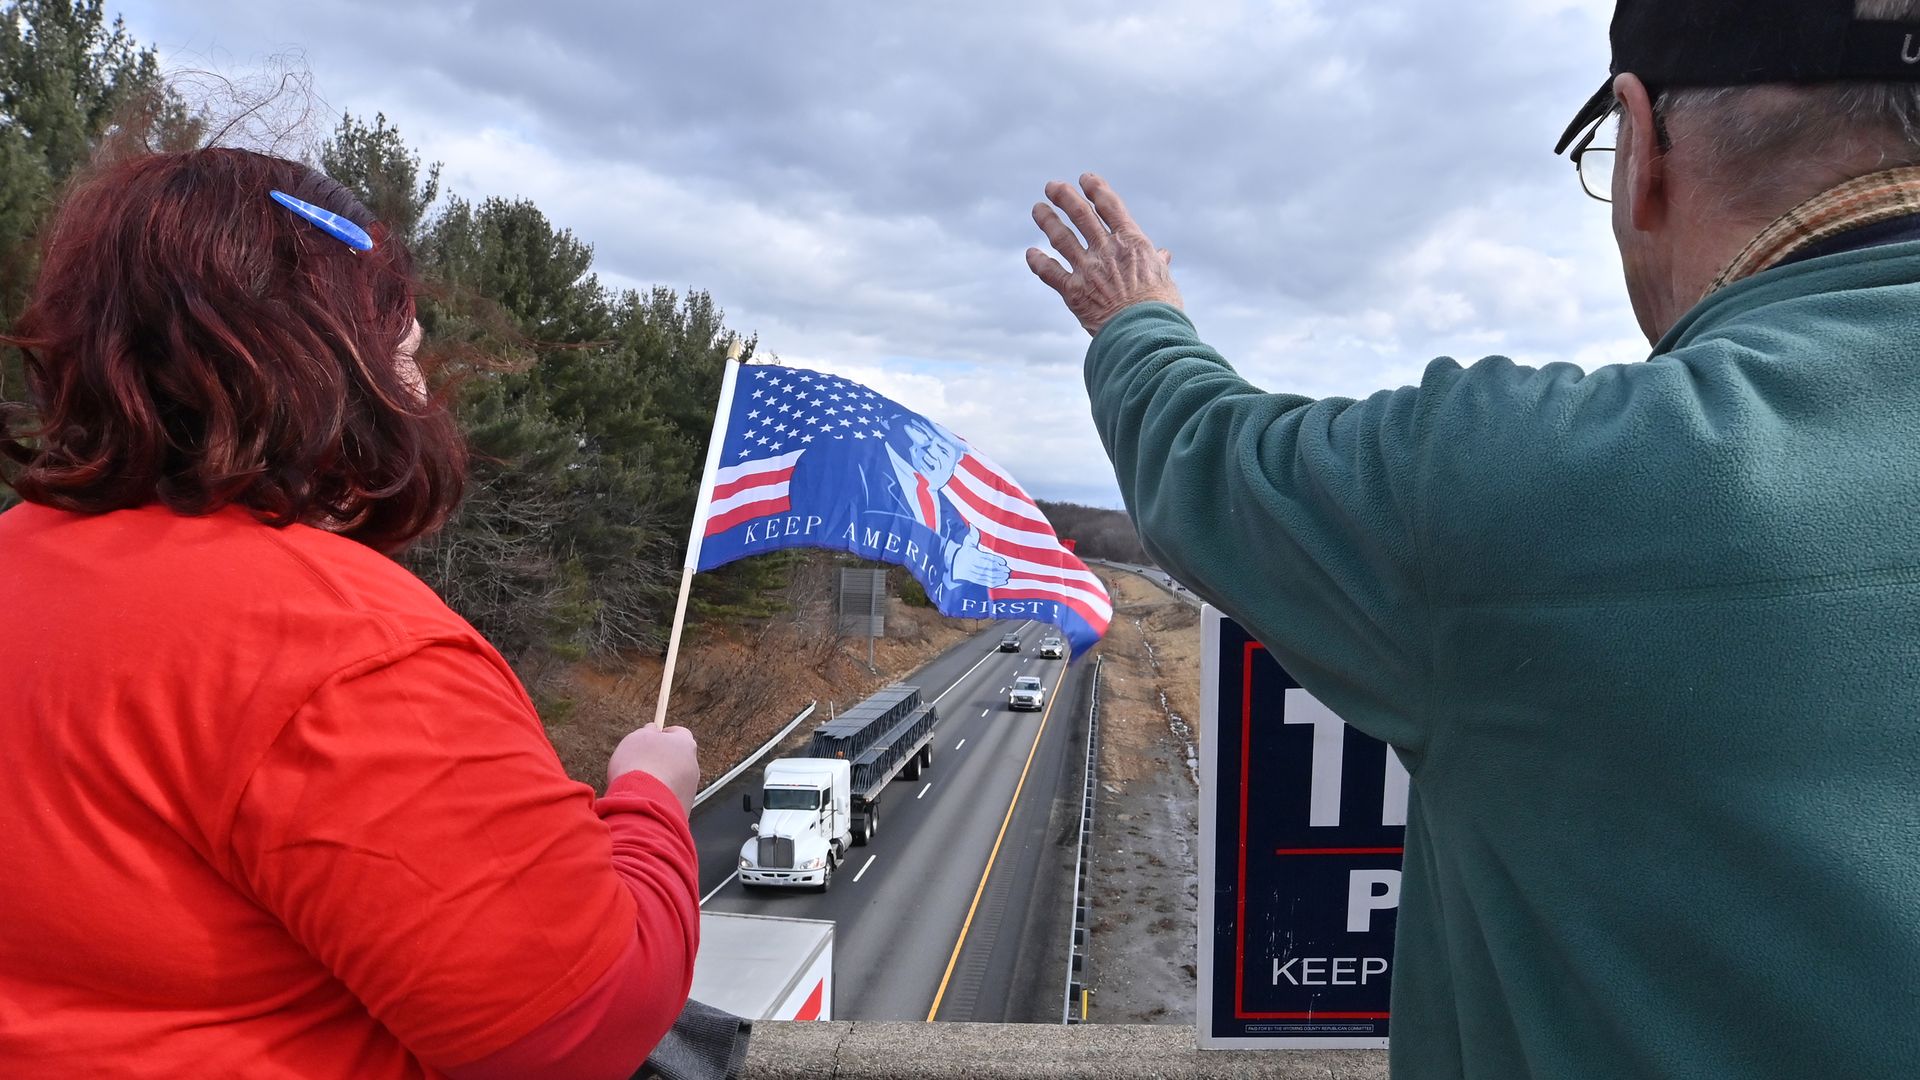 Supporters wave as the anti-vaccine mandate trucker's convoy heads toward Washington.